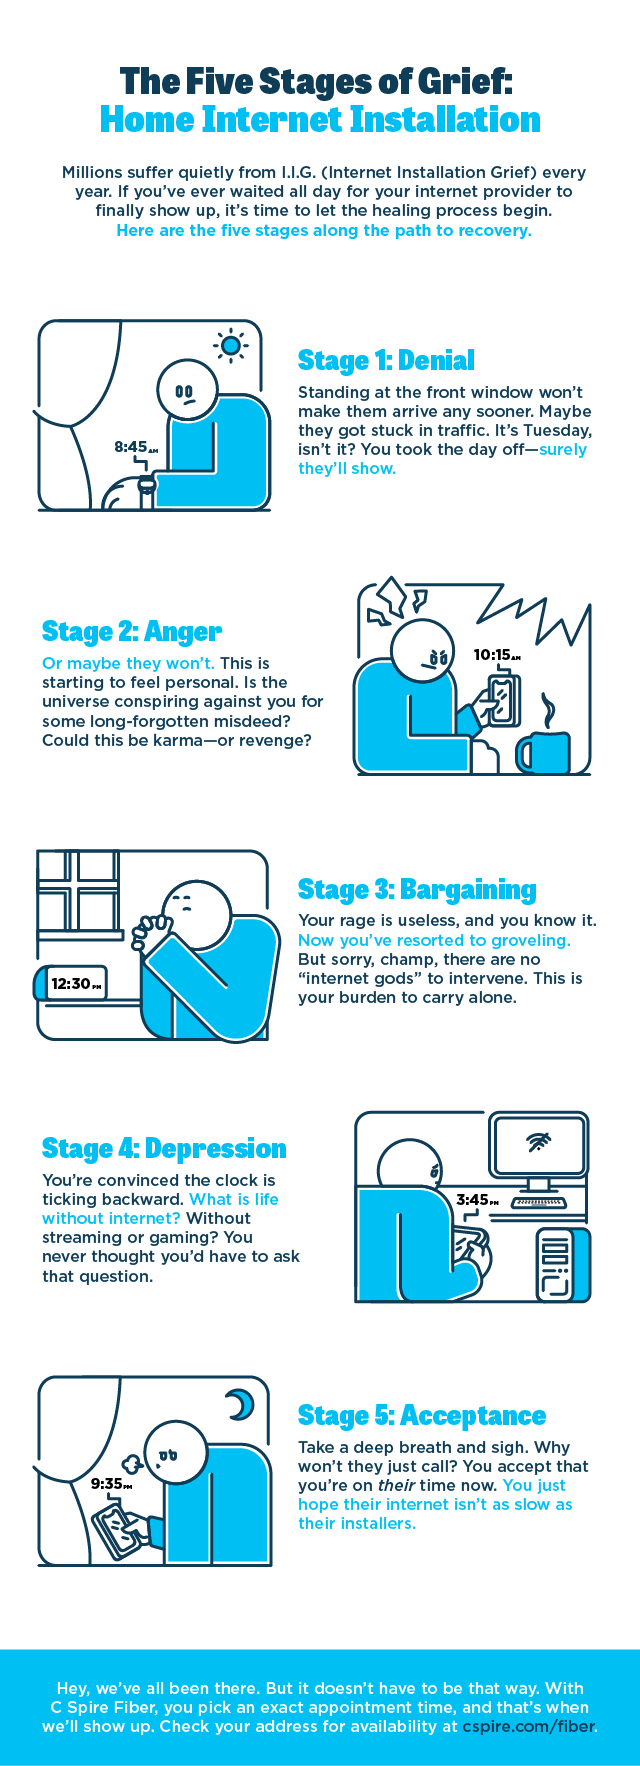 5 Stages of Grief infographic